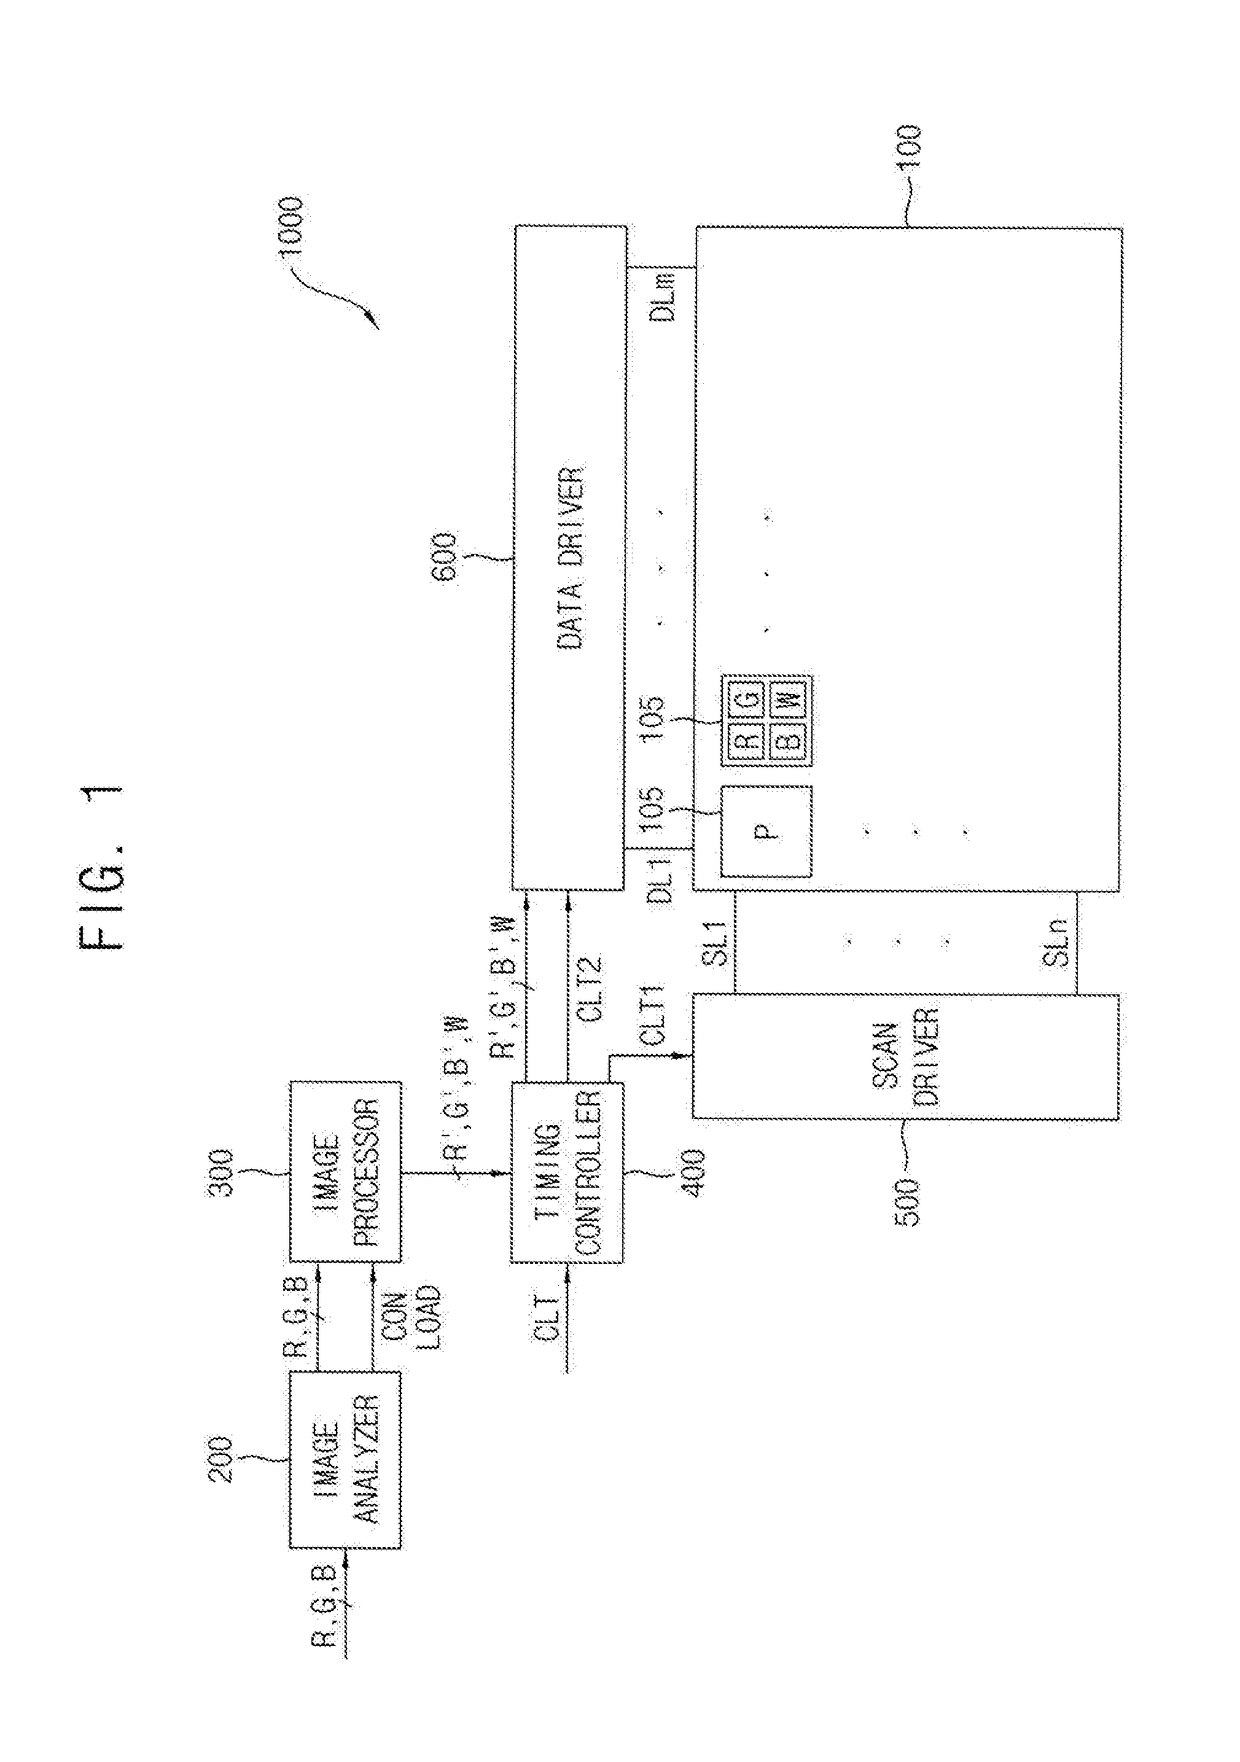 Display device and method for controlling peak luminance of the same